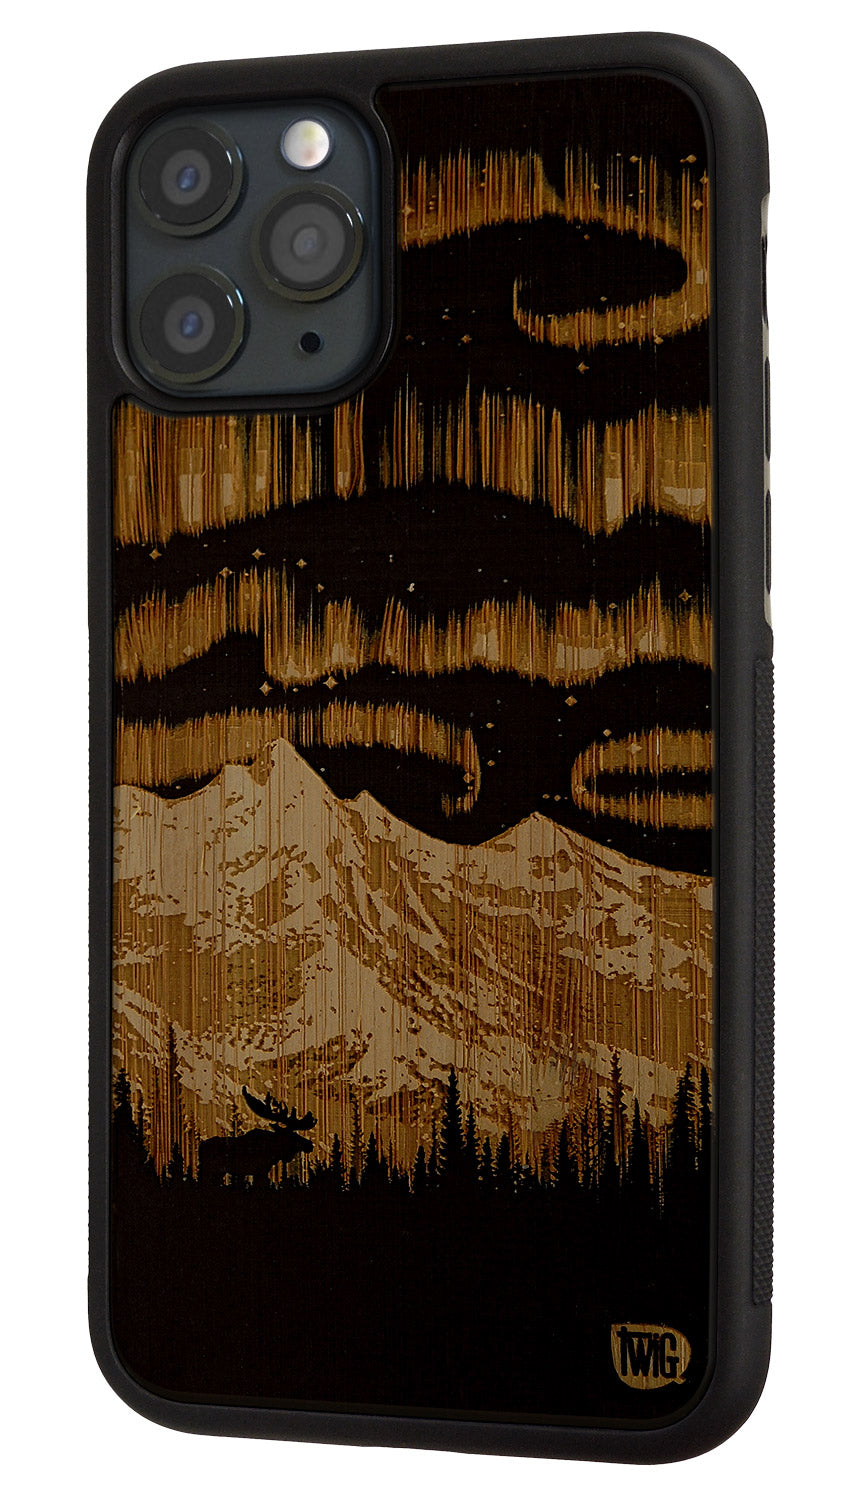 Northern Lights - Bamboo iPhone Case, iPhone Case - Twig Case Co.